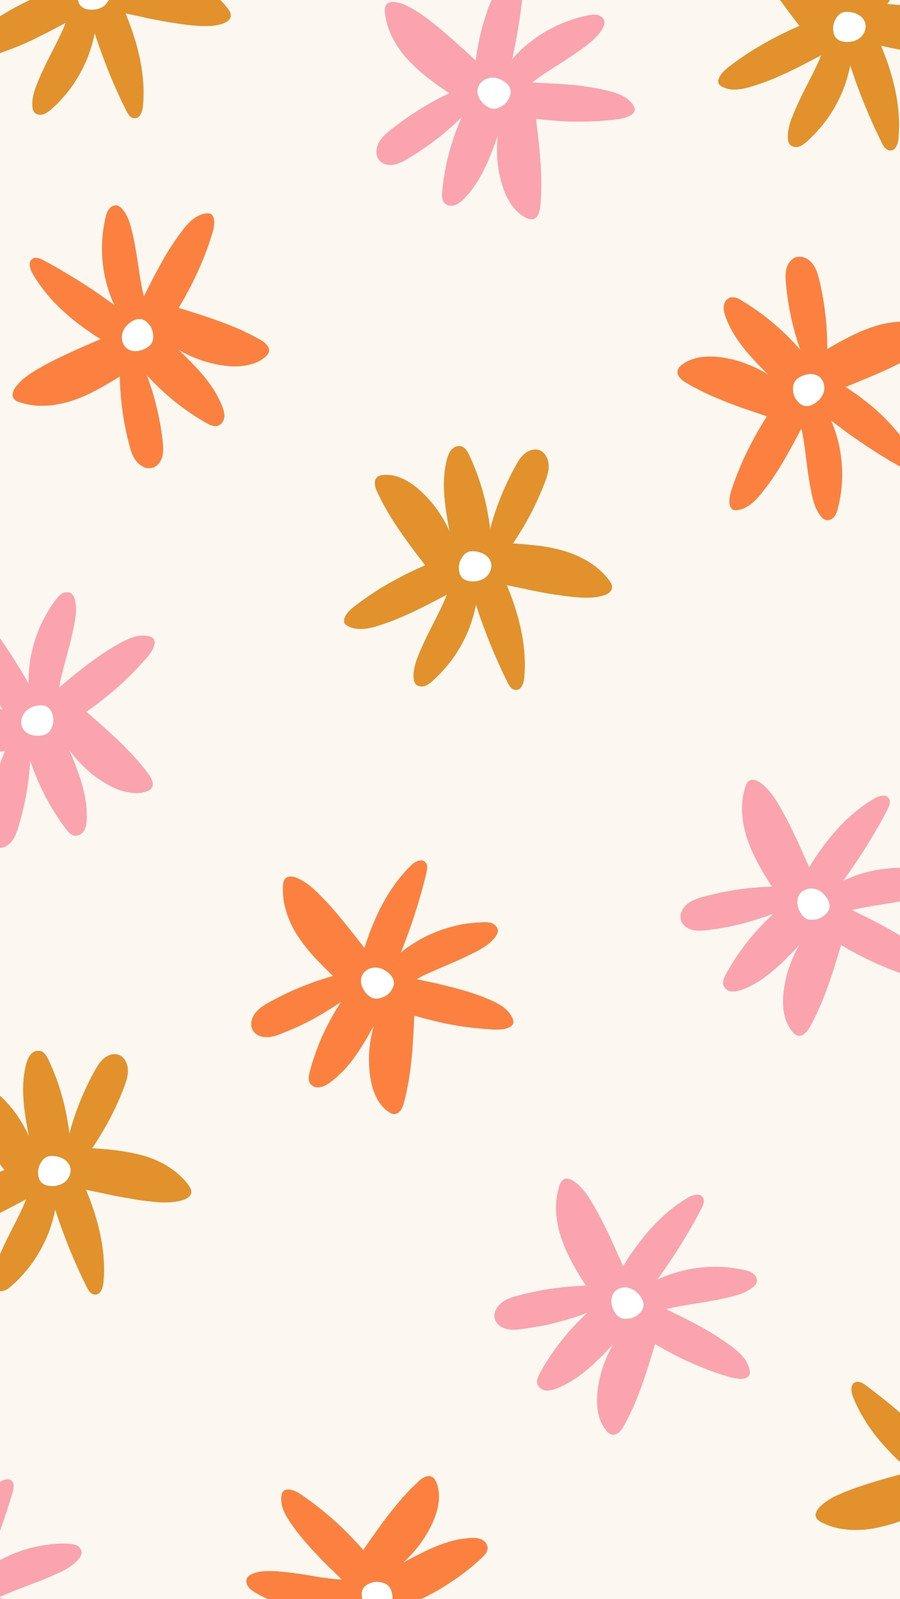 And Customizable Cute Pink Wallpaper Templates